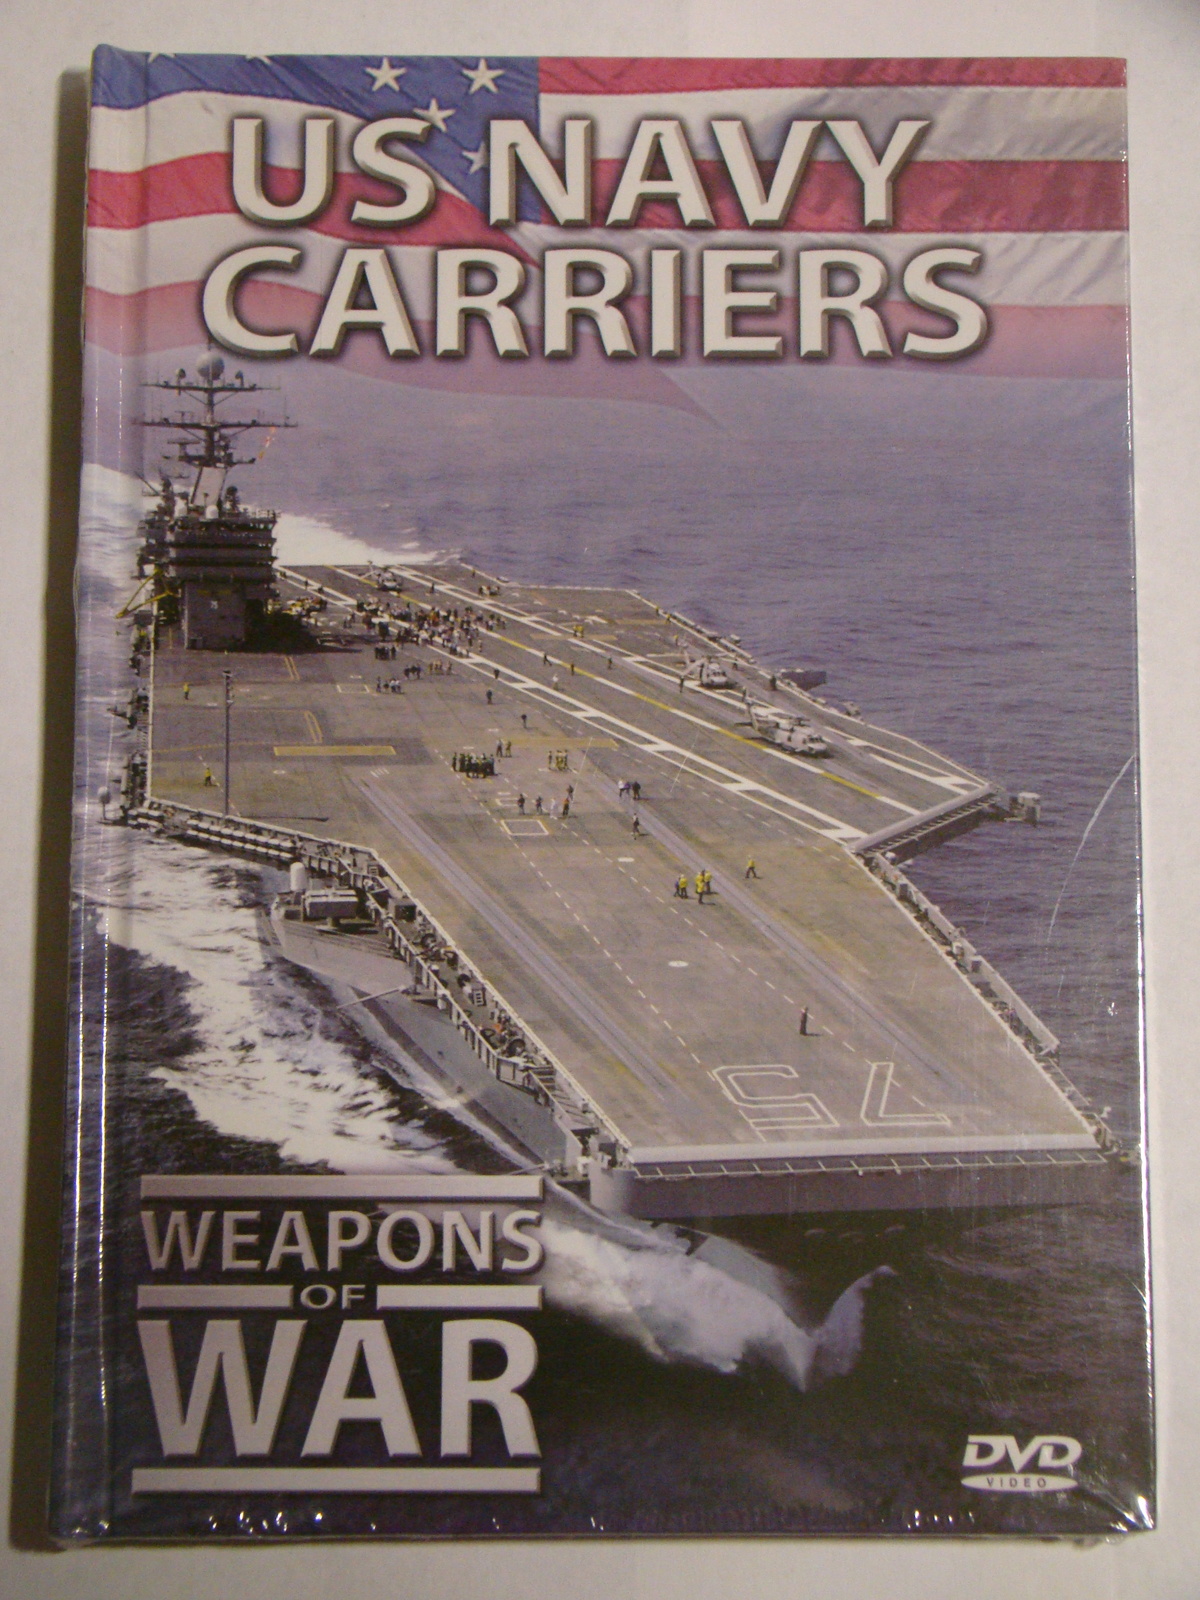 Primary image for WEAPONS OF WAR -  US NAVY CARRIERS (Dvd)